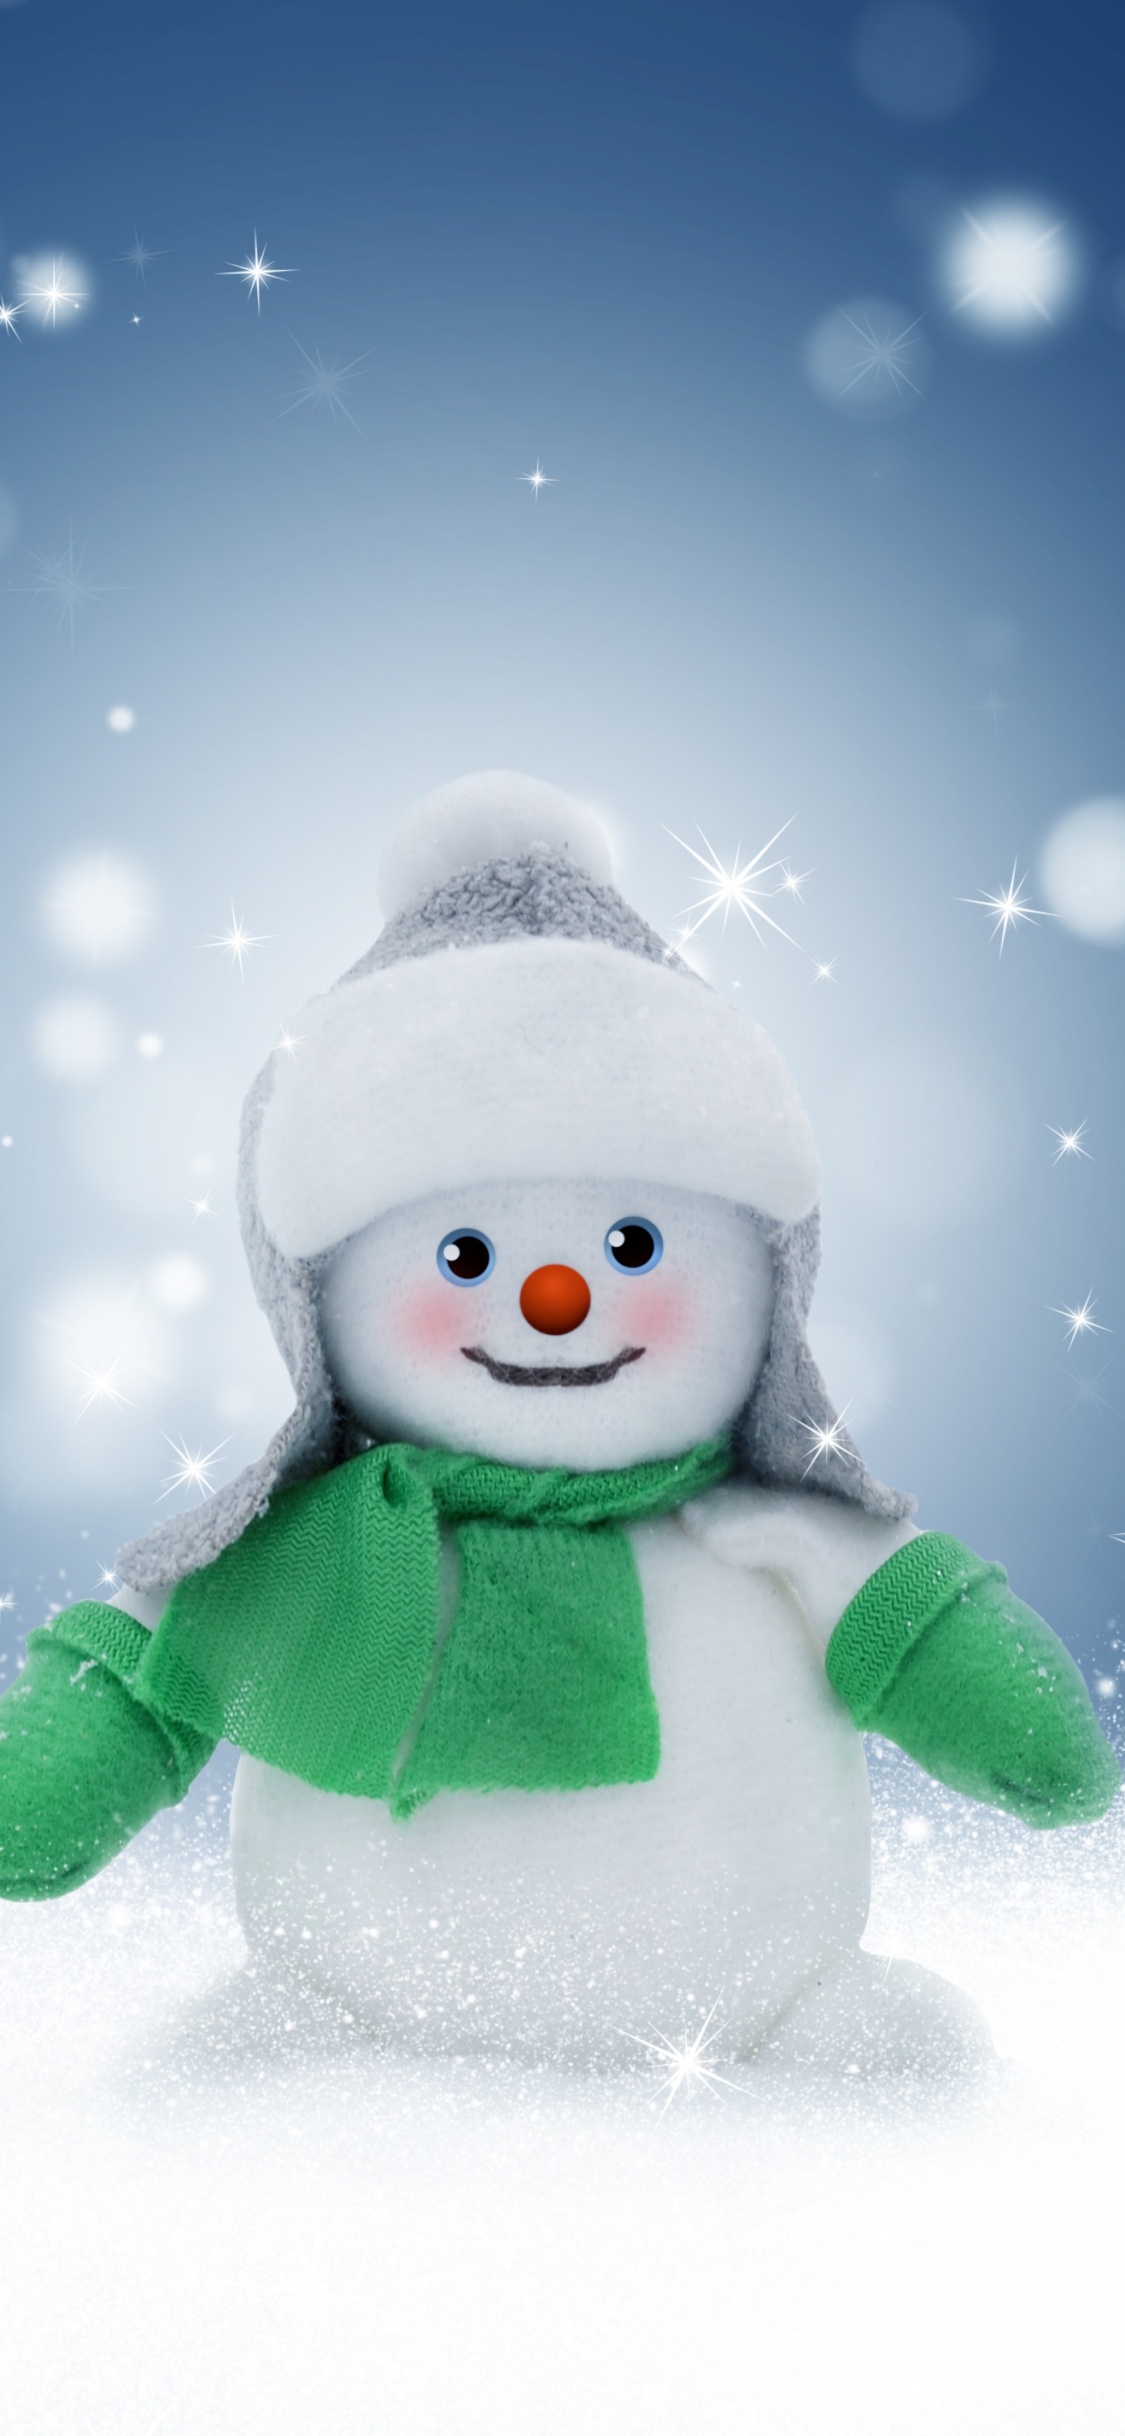 Christmas Day, Snow, Winter, Snowman, Playing in The Snow. Wallpaper in 1125x2436 Resolution